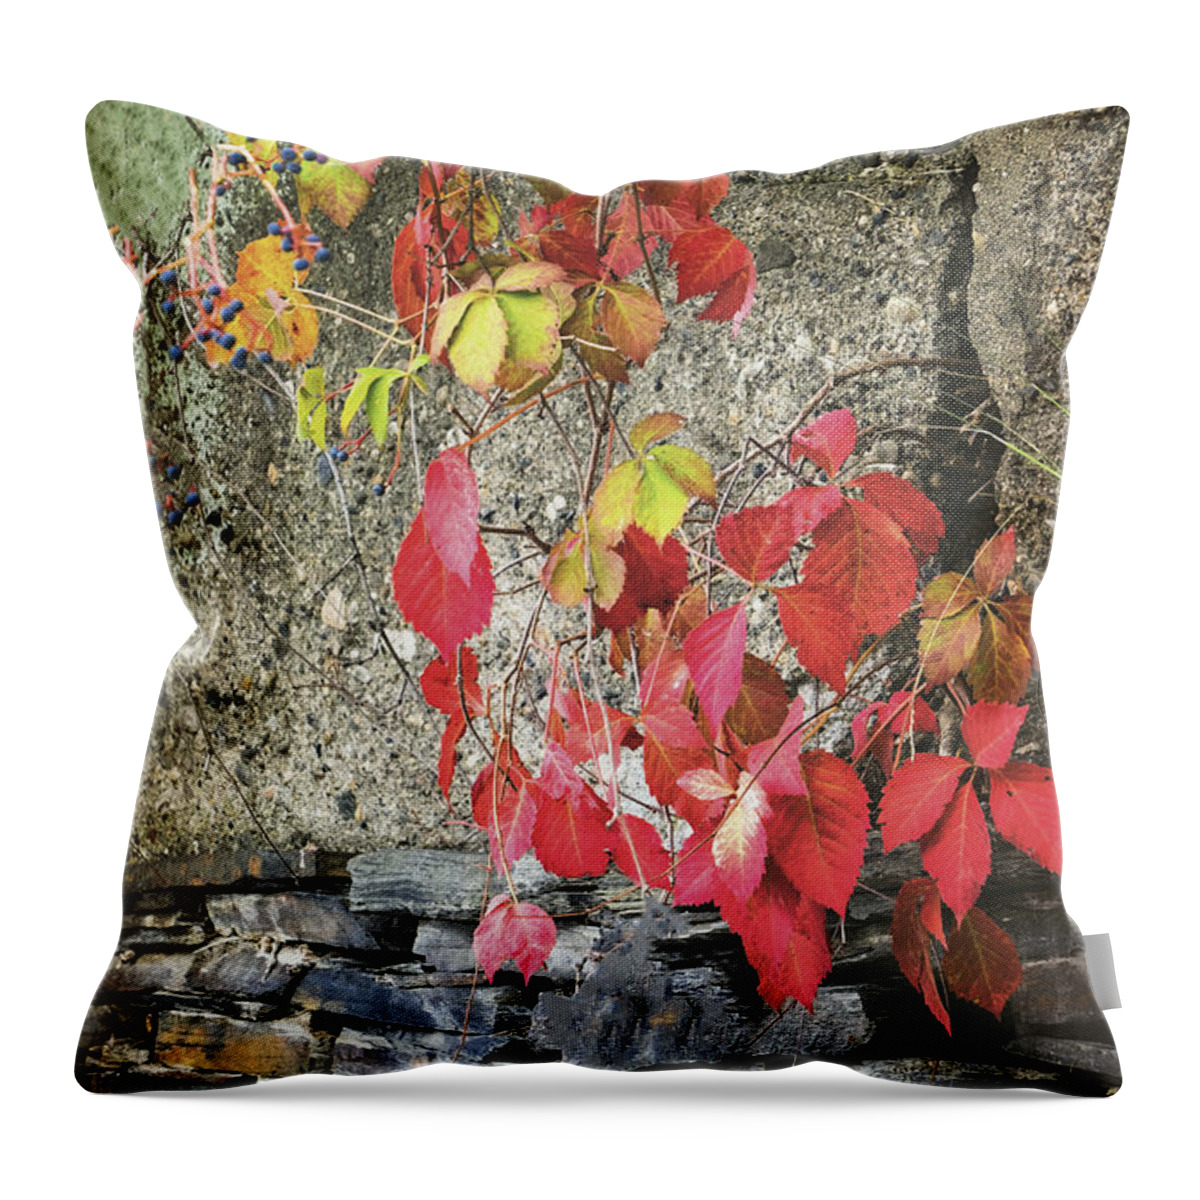 Whetstone Brook Throw Pillow featuring the photograph Autumn Leaves by Tom Singleton